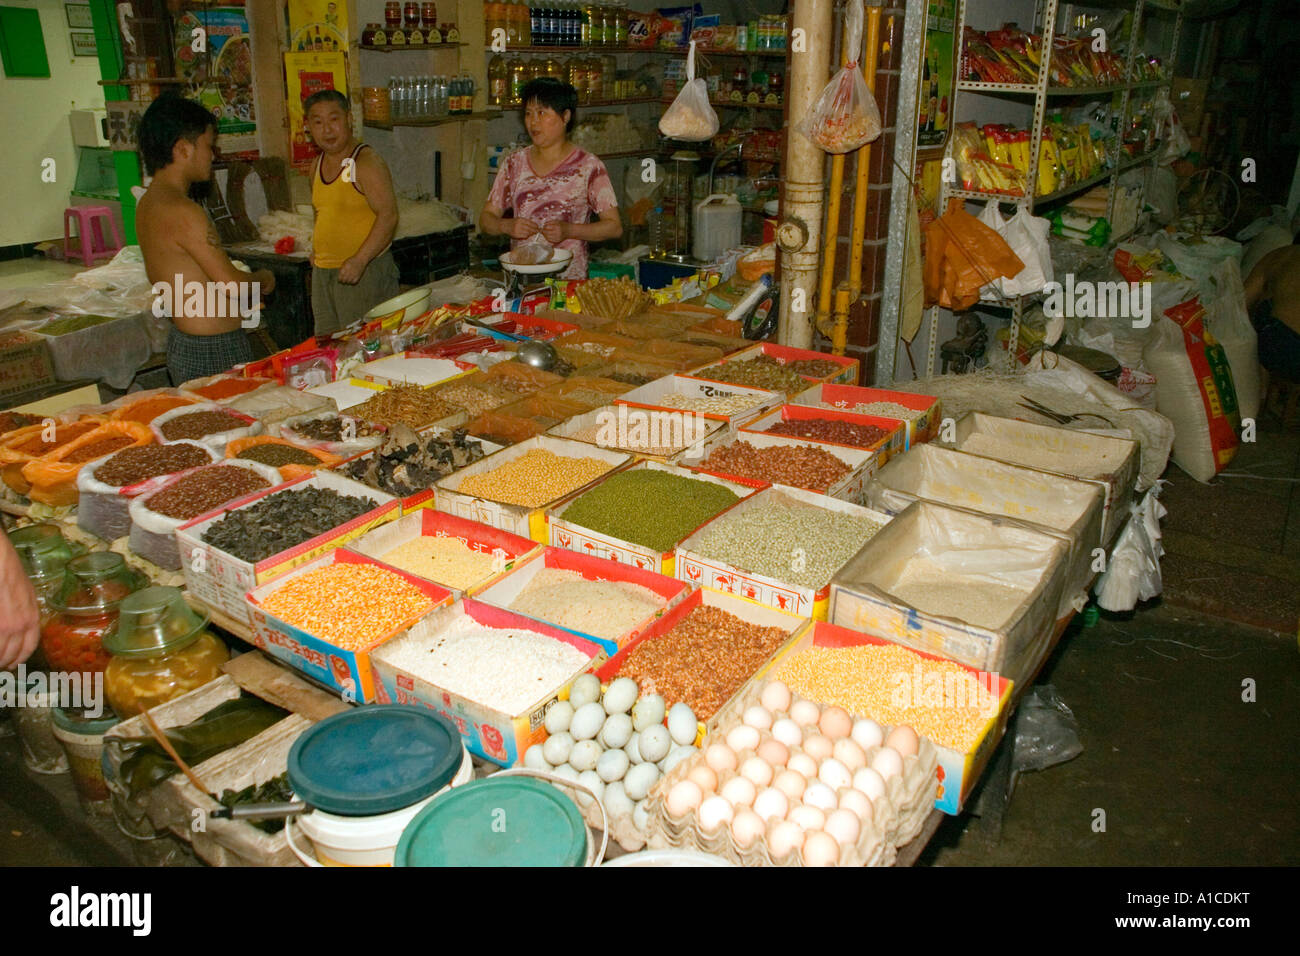 Spice and vegetable market stall Stock Photo